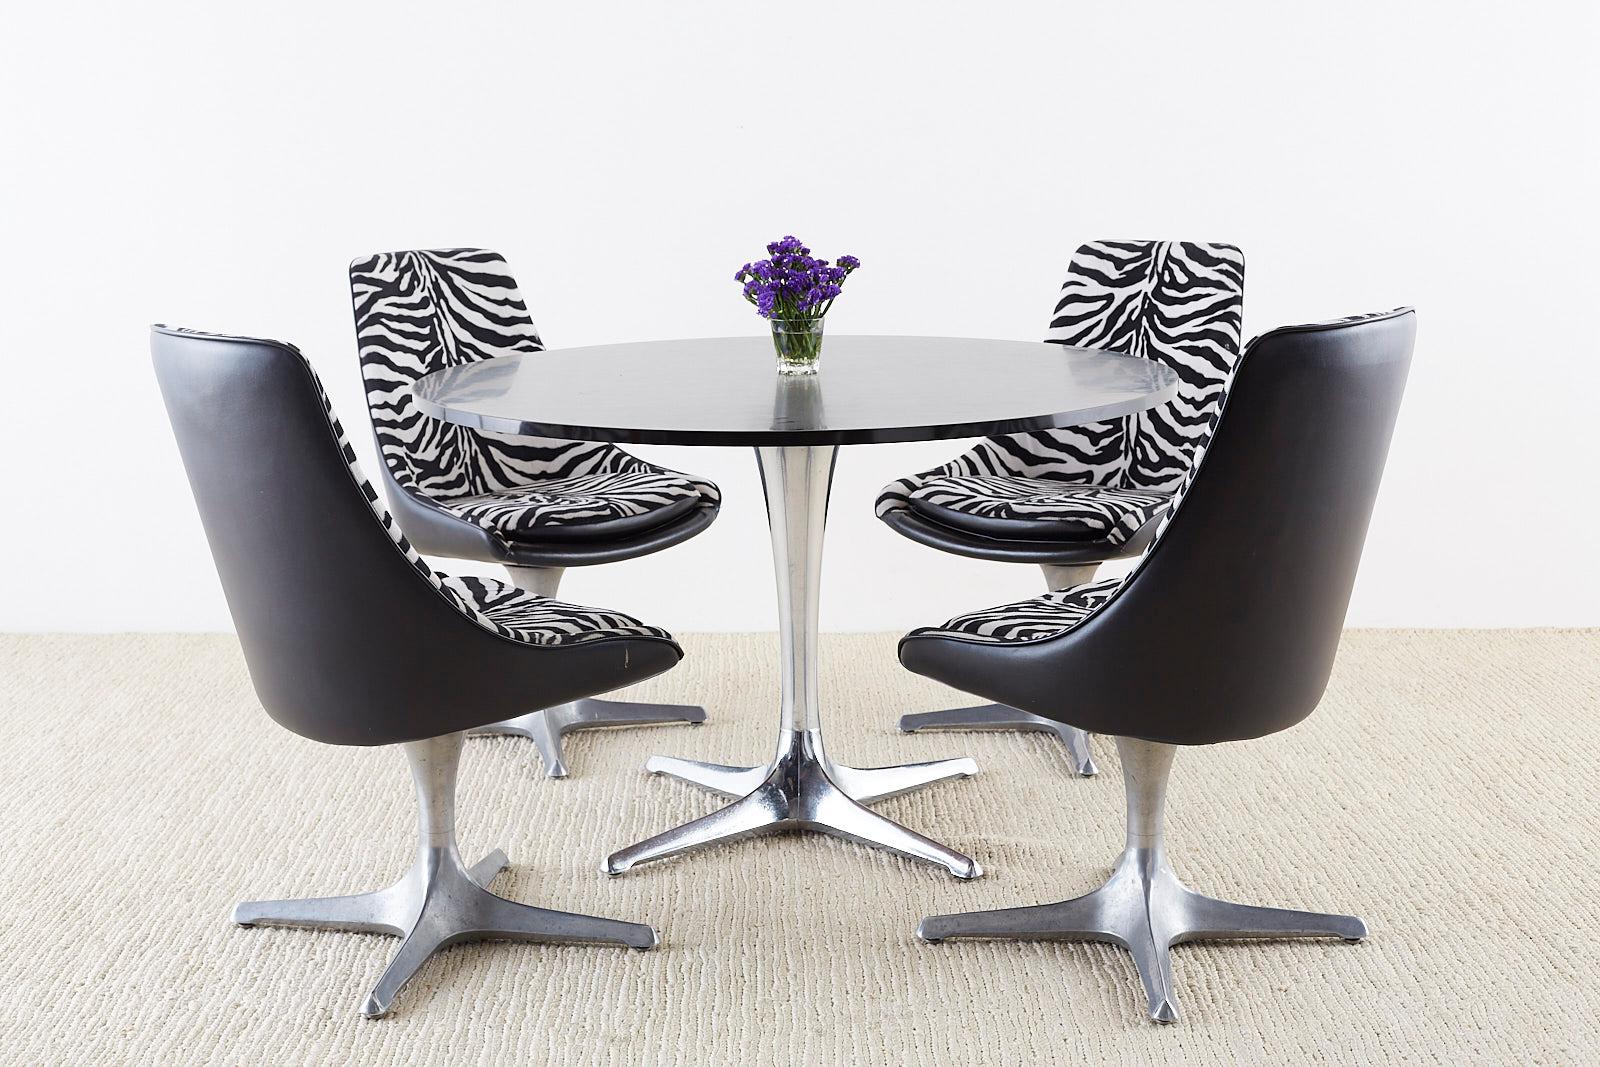 Rare set of four Mid-Century Modern dining chairs from Chromcraft decorables collection. Featuring the original zebra print upholstery on the swivel seats. Each chair has a loose seat cushion that retains the original tag. The chairs have an iconic